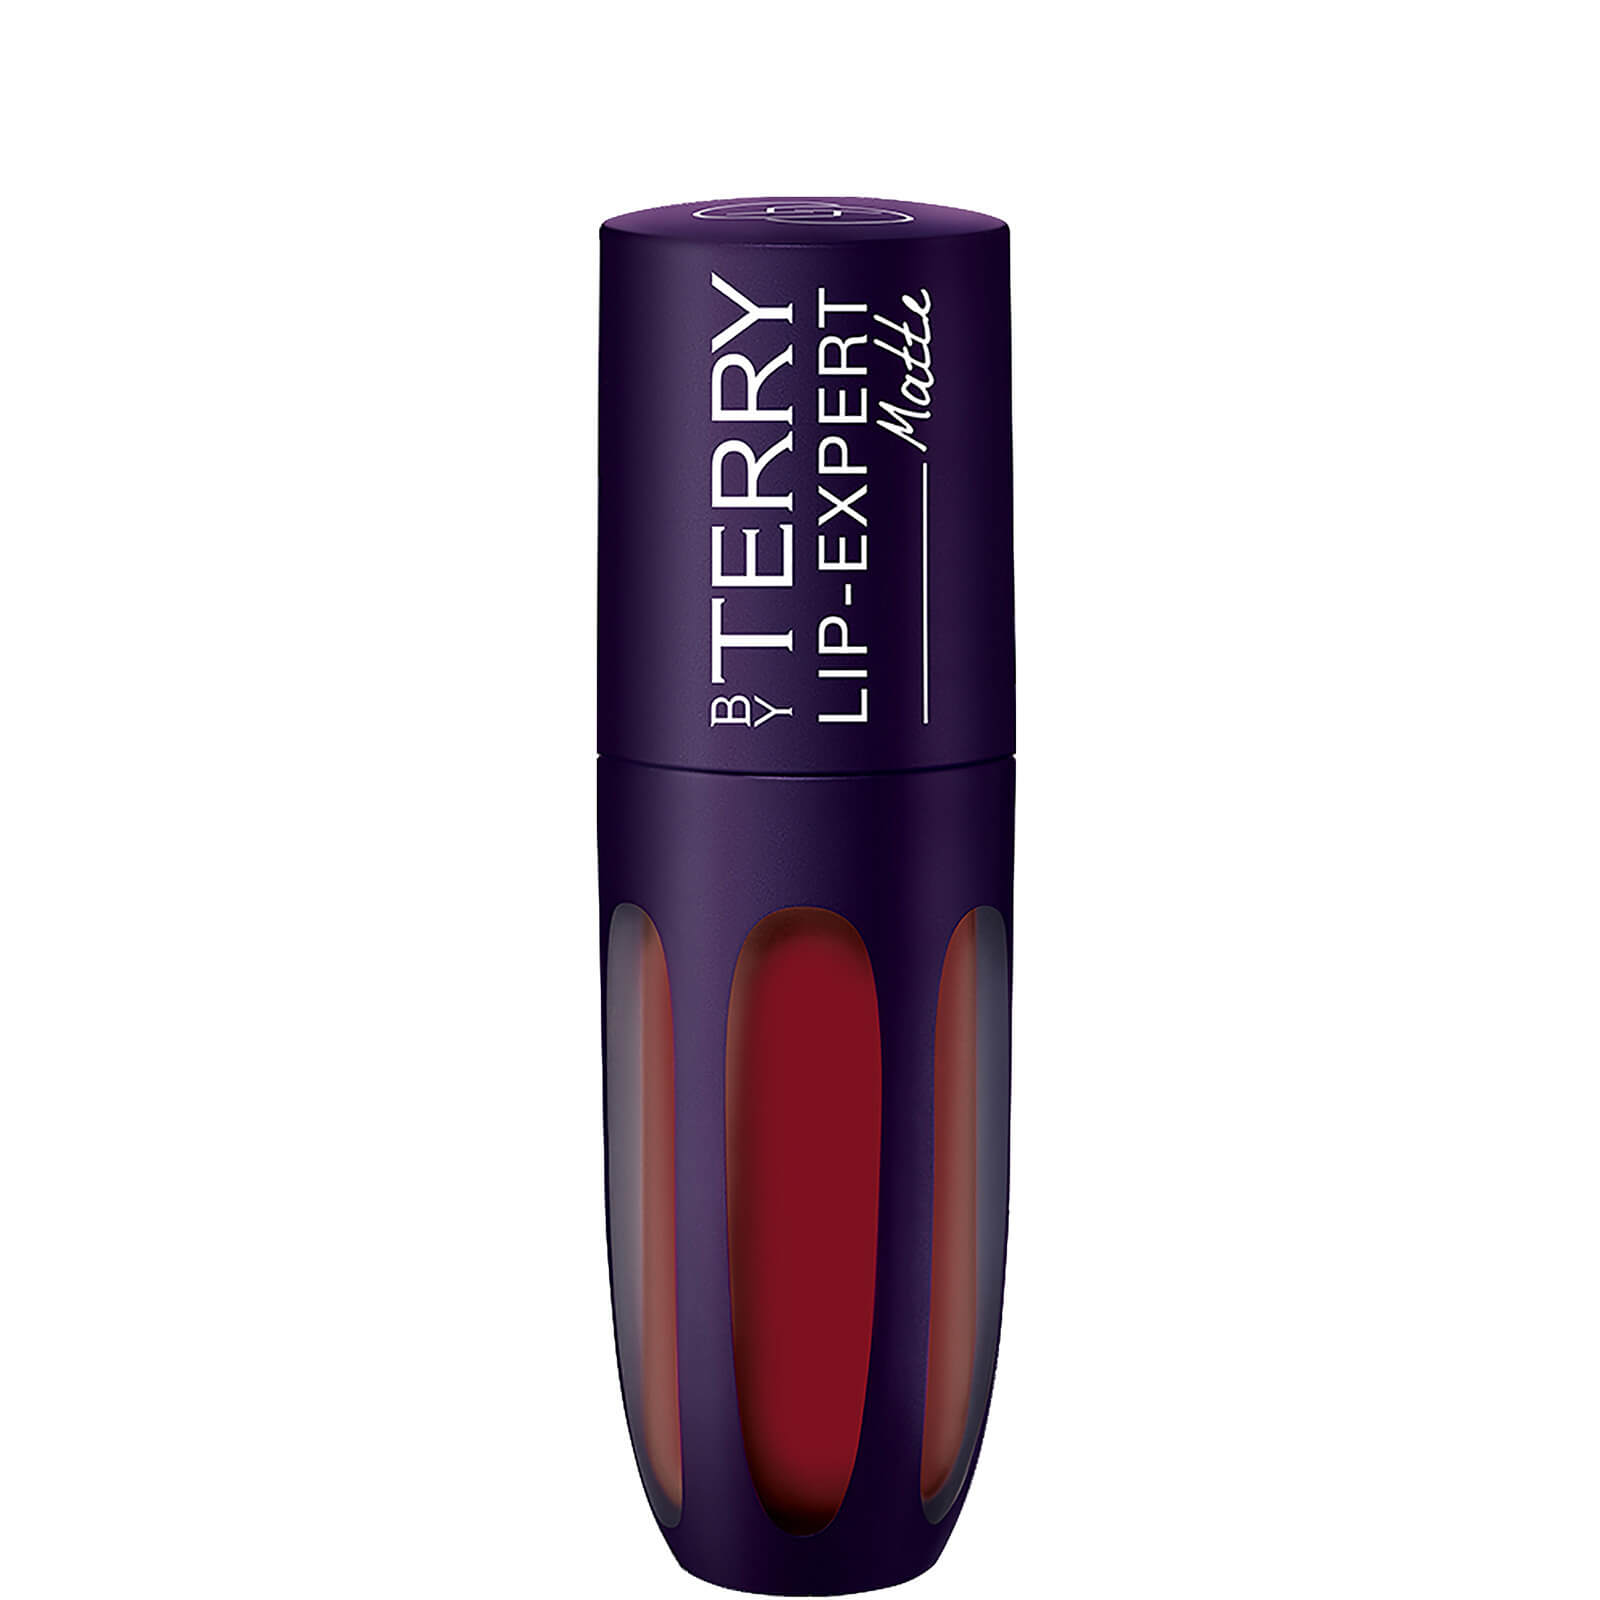 By Terry LIP-EXPERT MATTE Liquid Lipstick (Various Shades) - N.7 Gipsy Wine